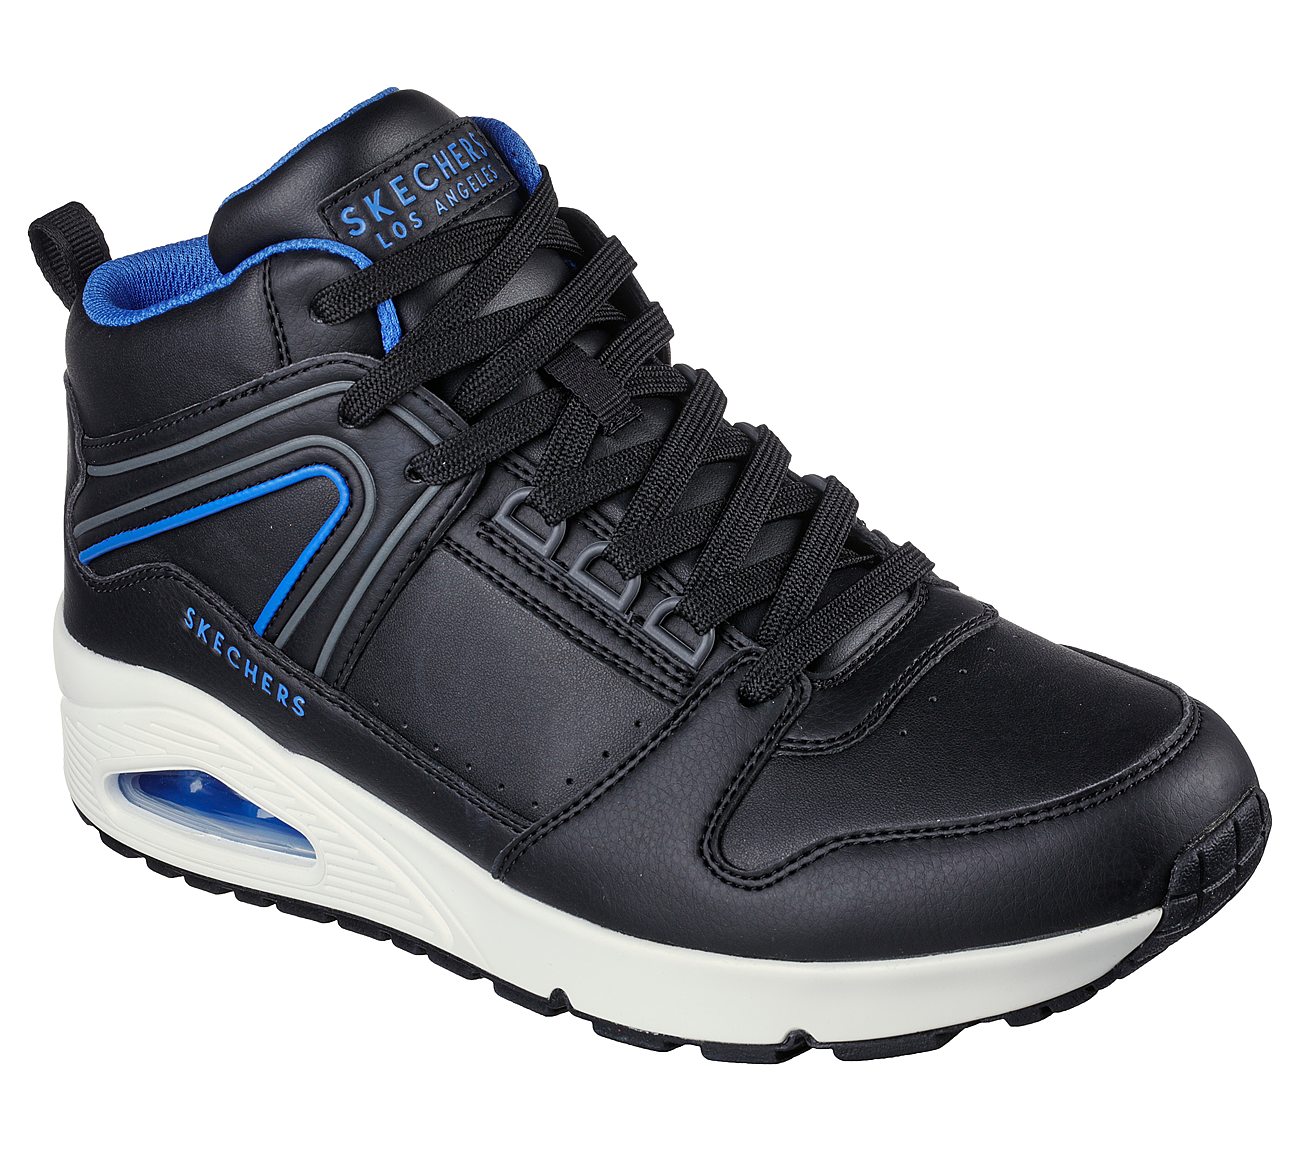 UNO - KEEP CLOSE, BLACK/BLUE Footwear Right View